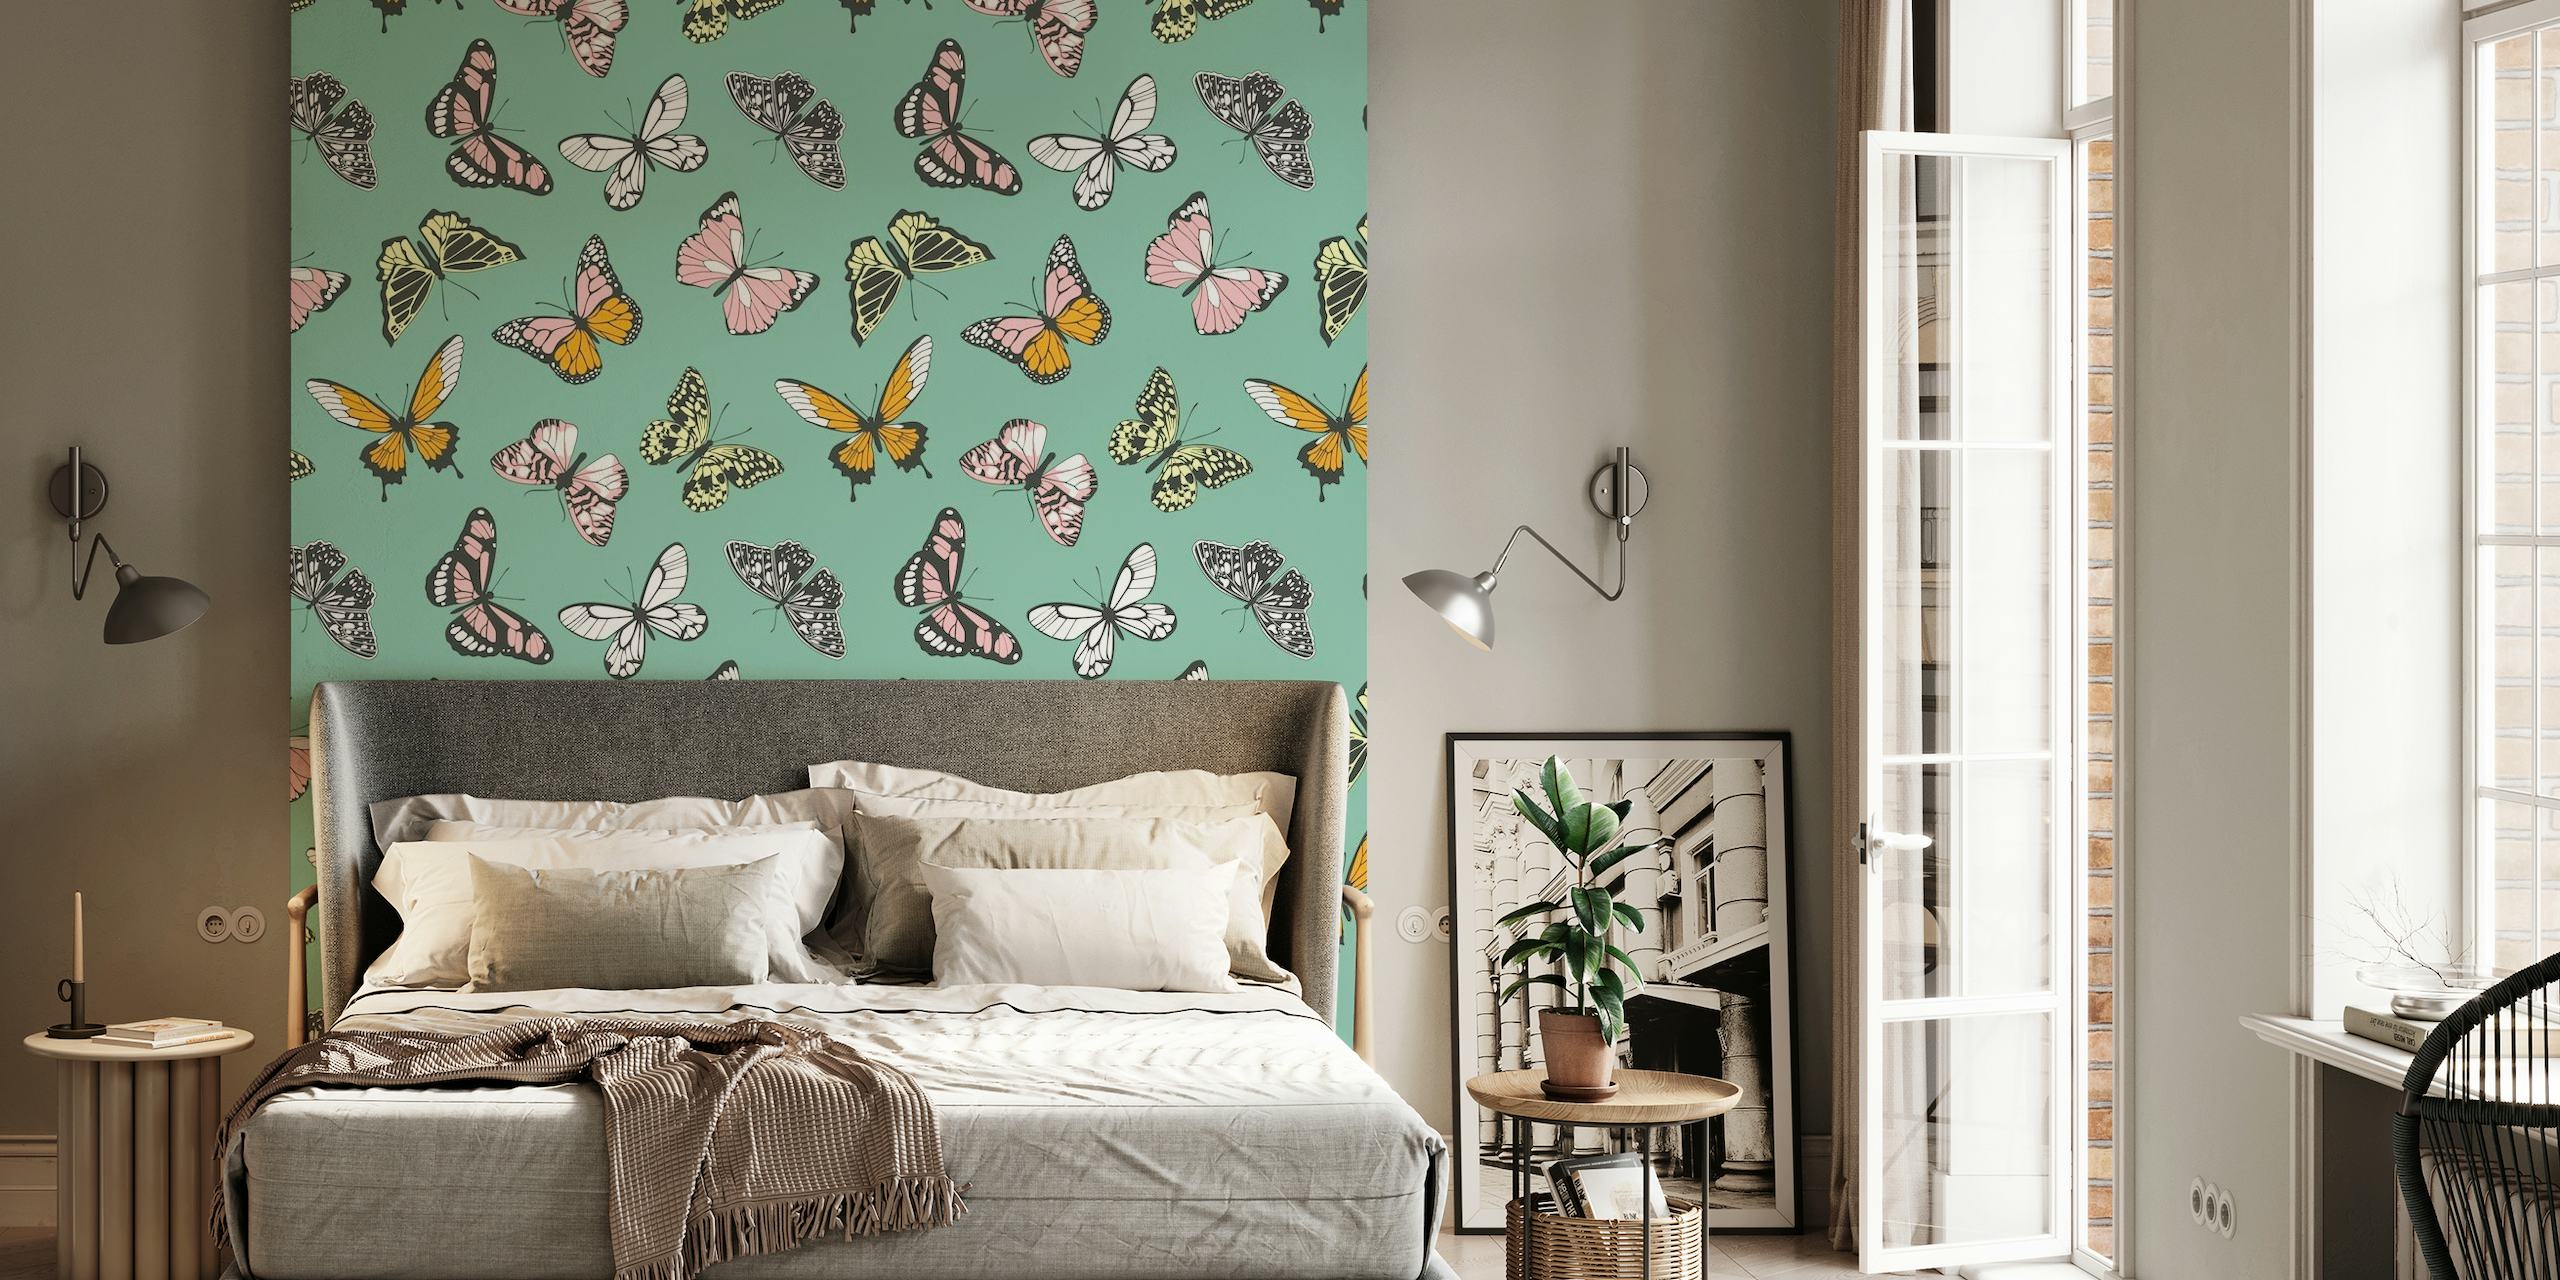 Wall mural with pastel-colored butterflies on a teal background, evoking springtime vibes